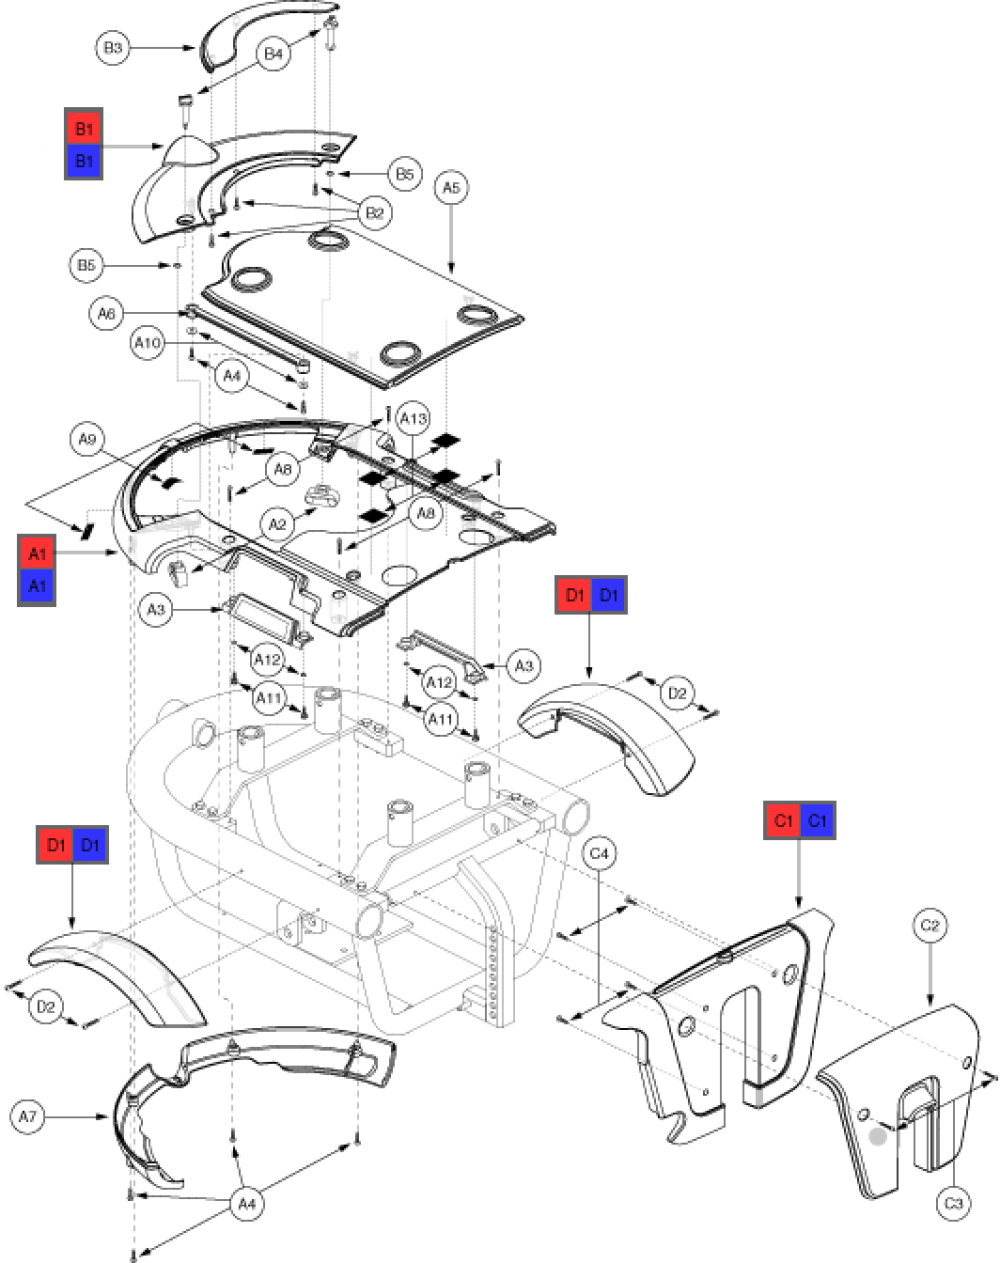 Shroud Assembly - Off-board Charger parts diagram